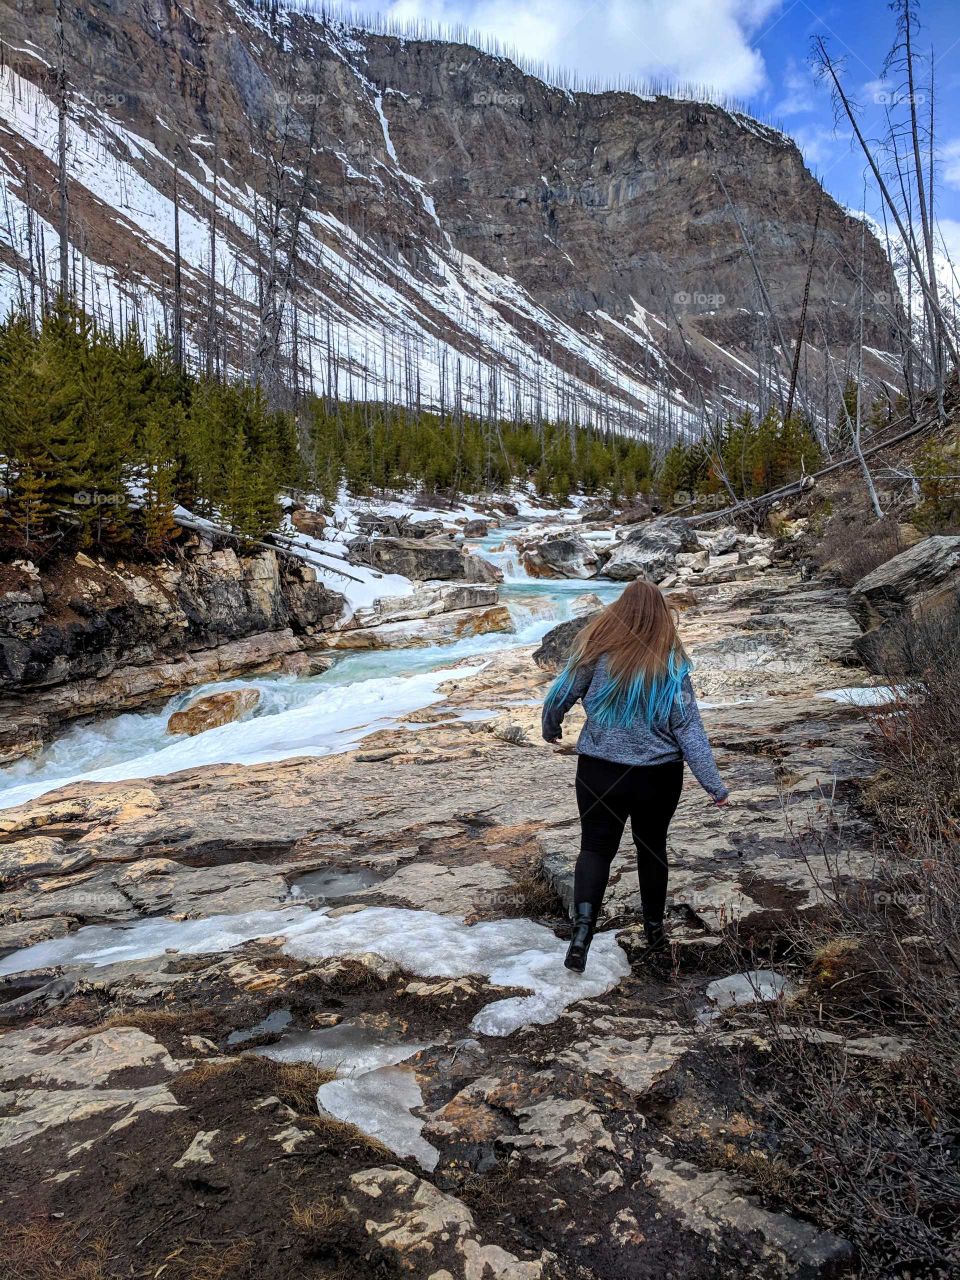 Just wandering in Marble Canyon